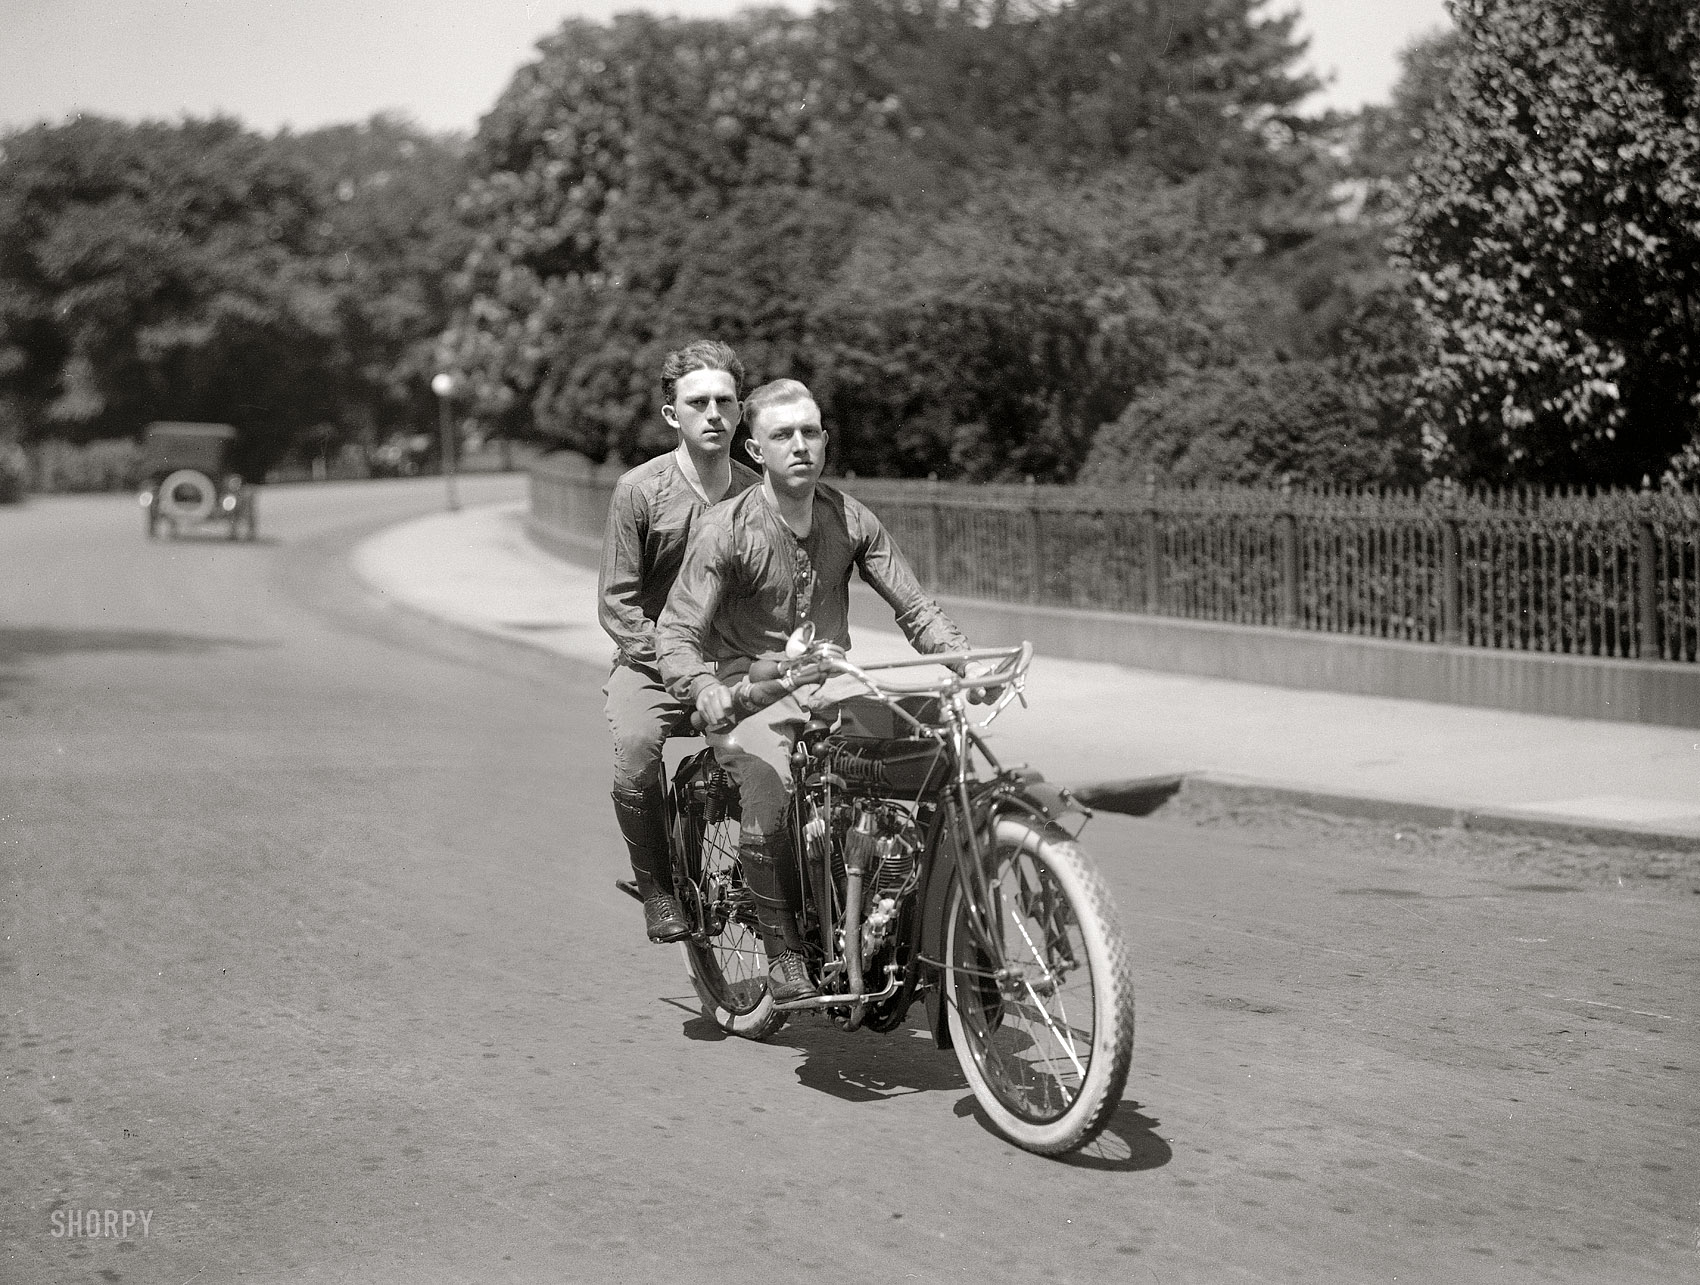 1915. "Baker and O'Brien, transcontinental motorcyclists, at north of Ellipse below White House." Dick O'Brien and Bud Baker were two "Washington high school boys" who made a five-month, 10,000-mile round trip to the West Coast to see the California expositions. Said Dick: "Our experiences will prove mighty interesting when we start to tell them." Harris & Ewing Collection. View full size.